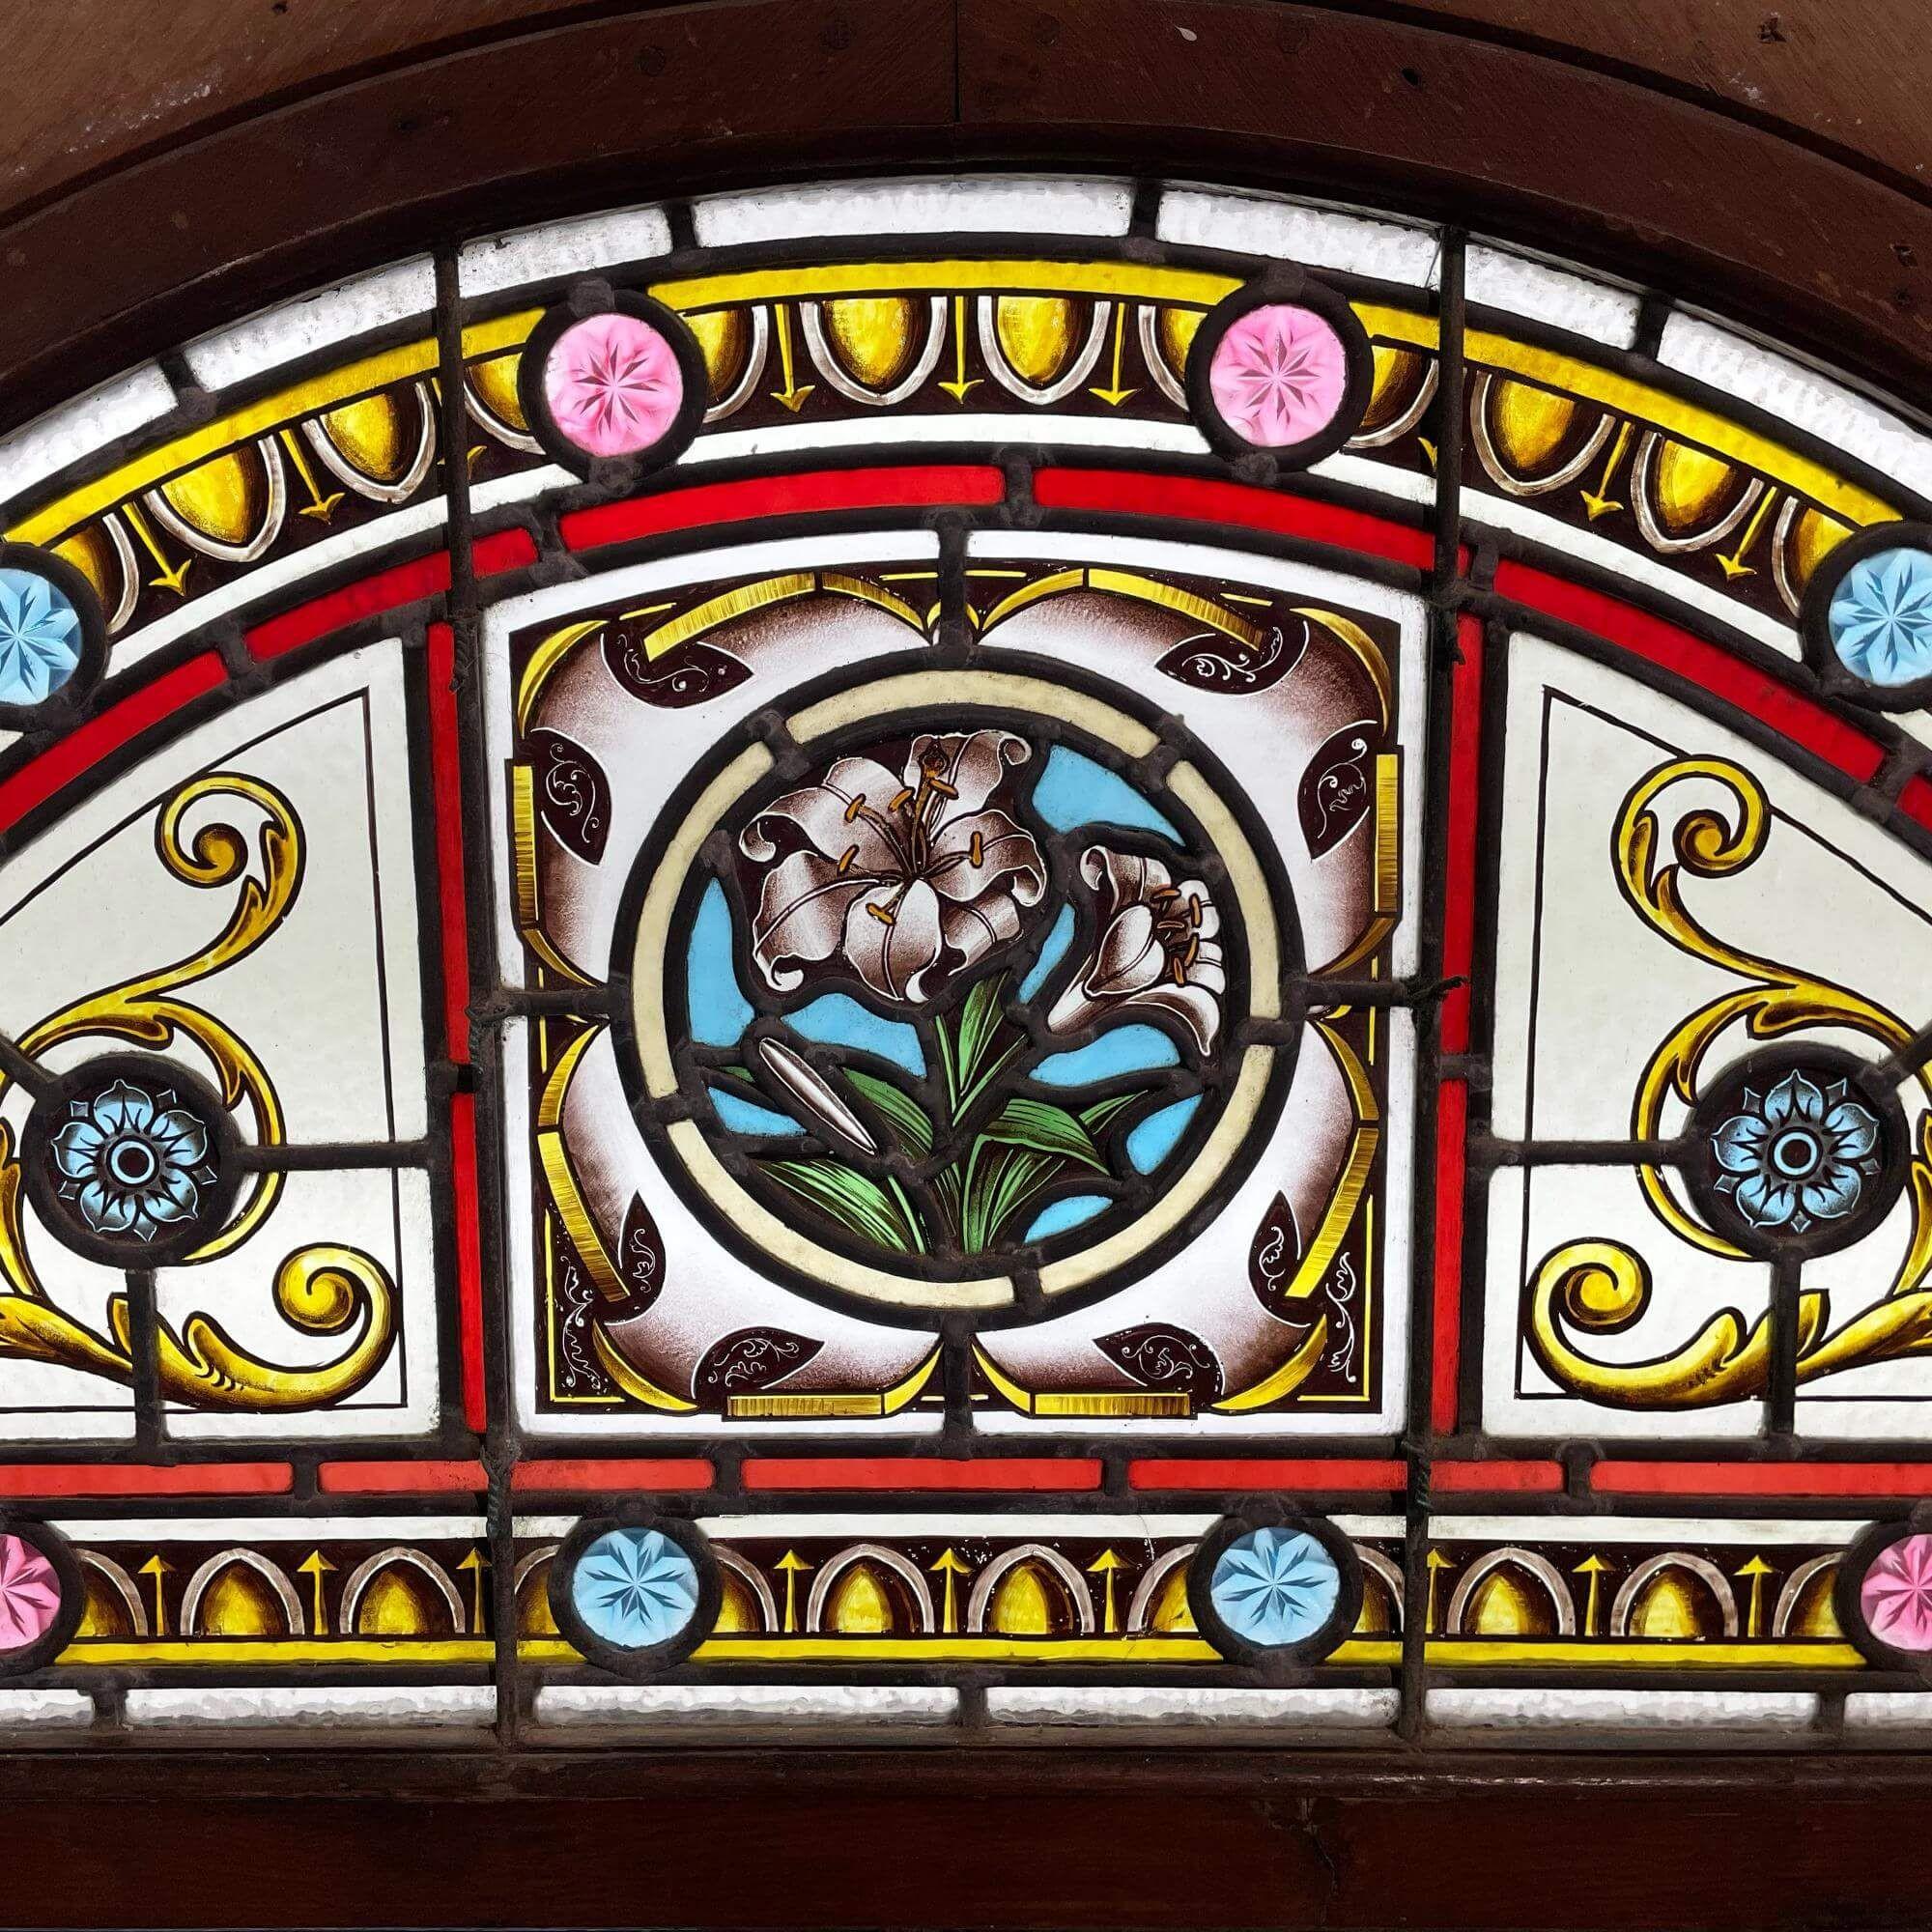 A wonderfully vibrant antique English stained glass fanlight, reclaimed from a hotel in Newquay, UK. Though dating from the late 19th century, this Victorian fanlight will make a stunning feature above a porch or dividing door in properties